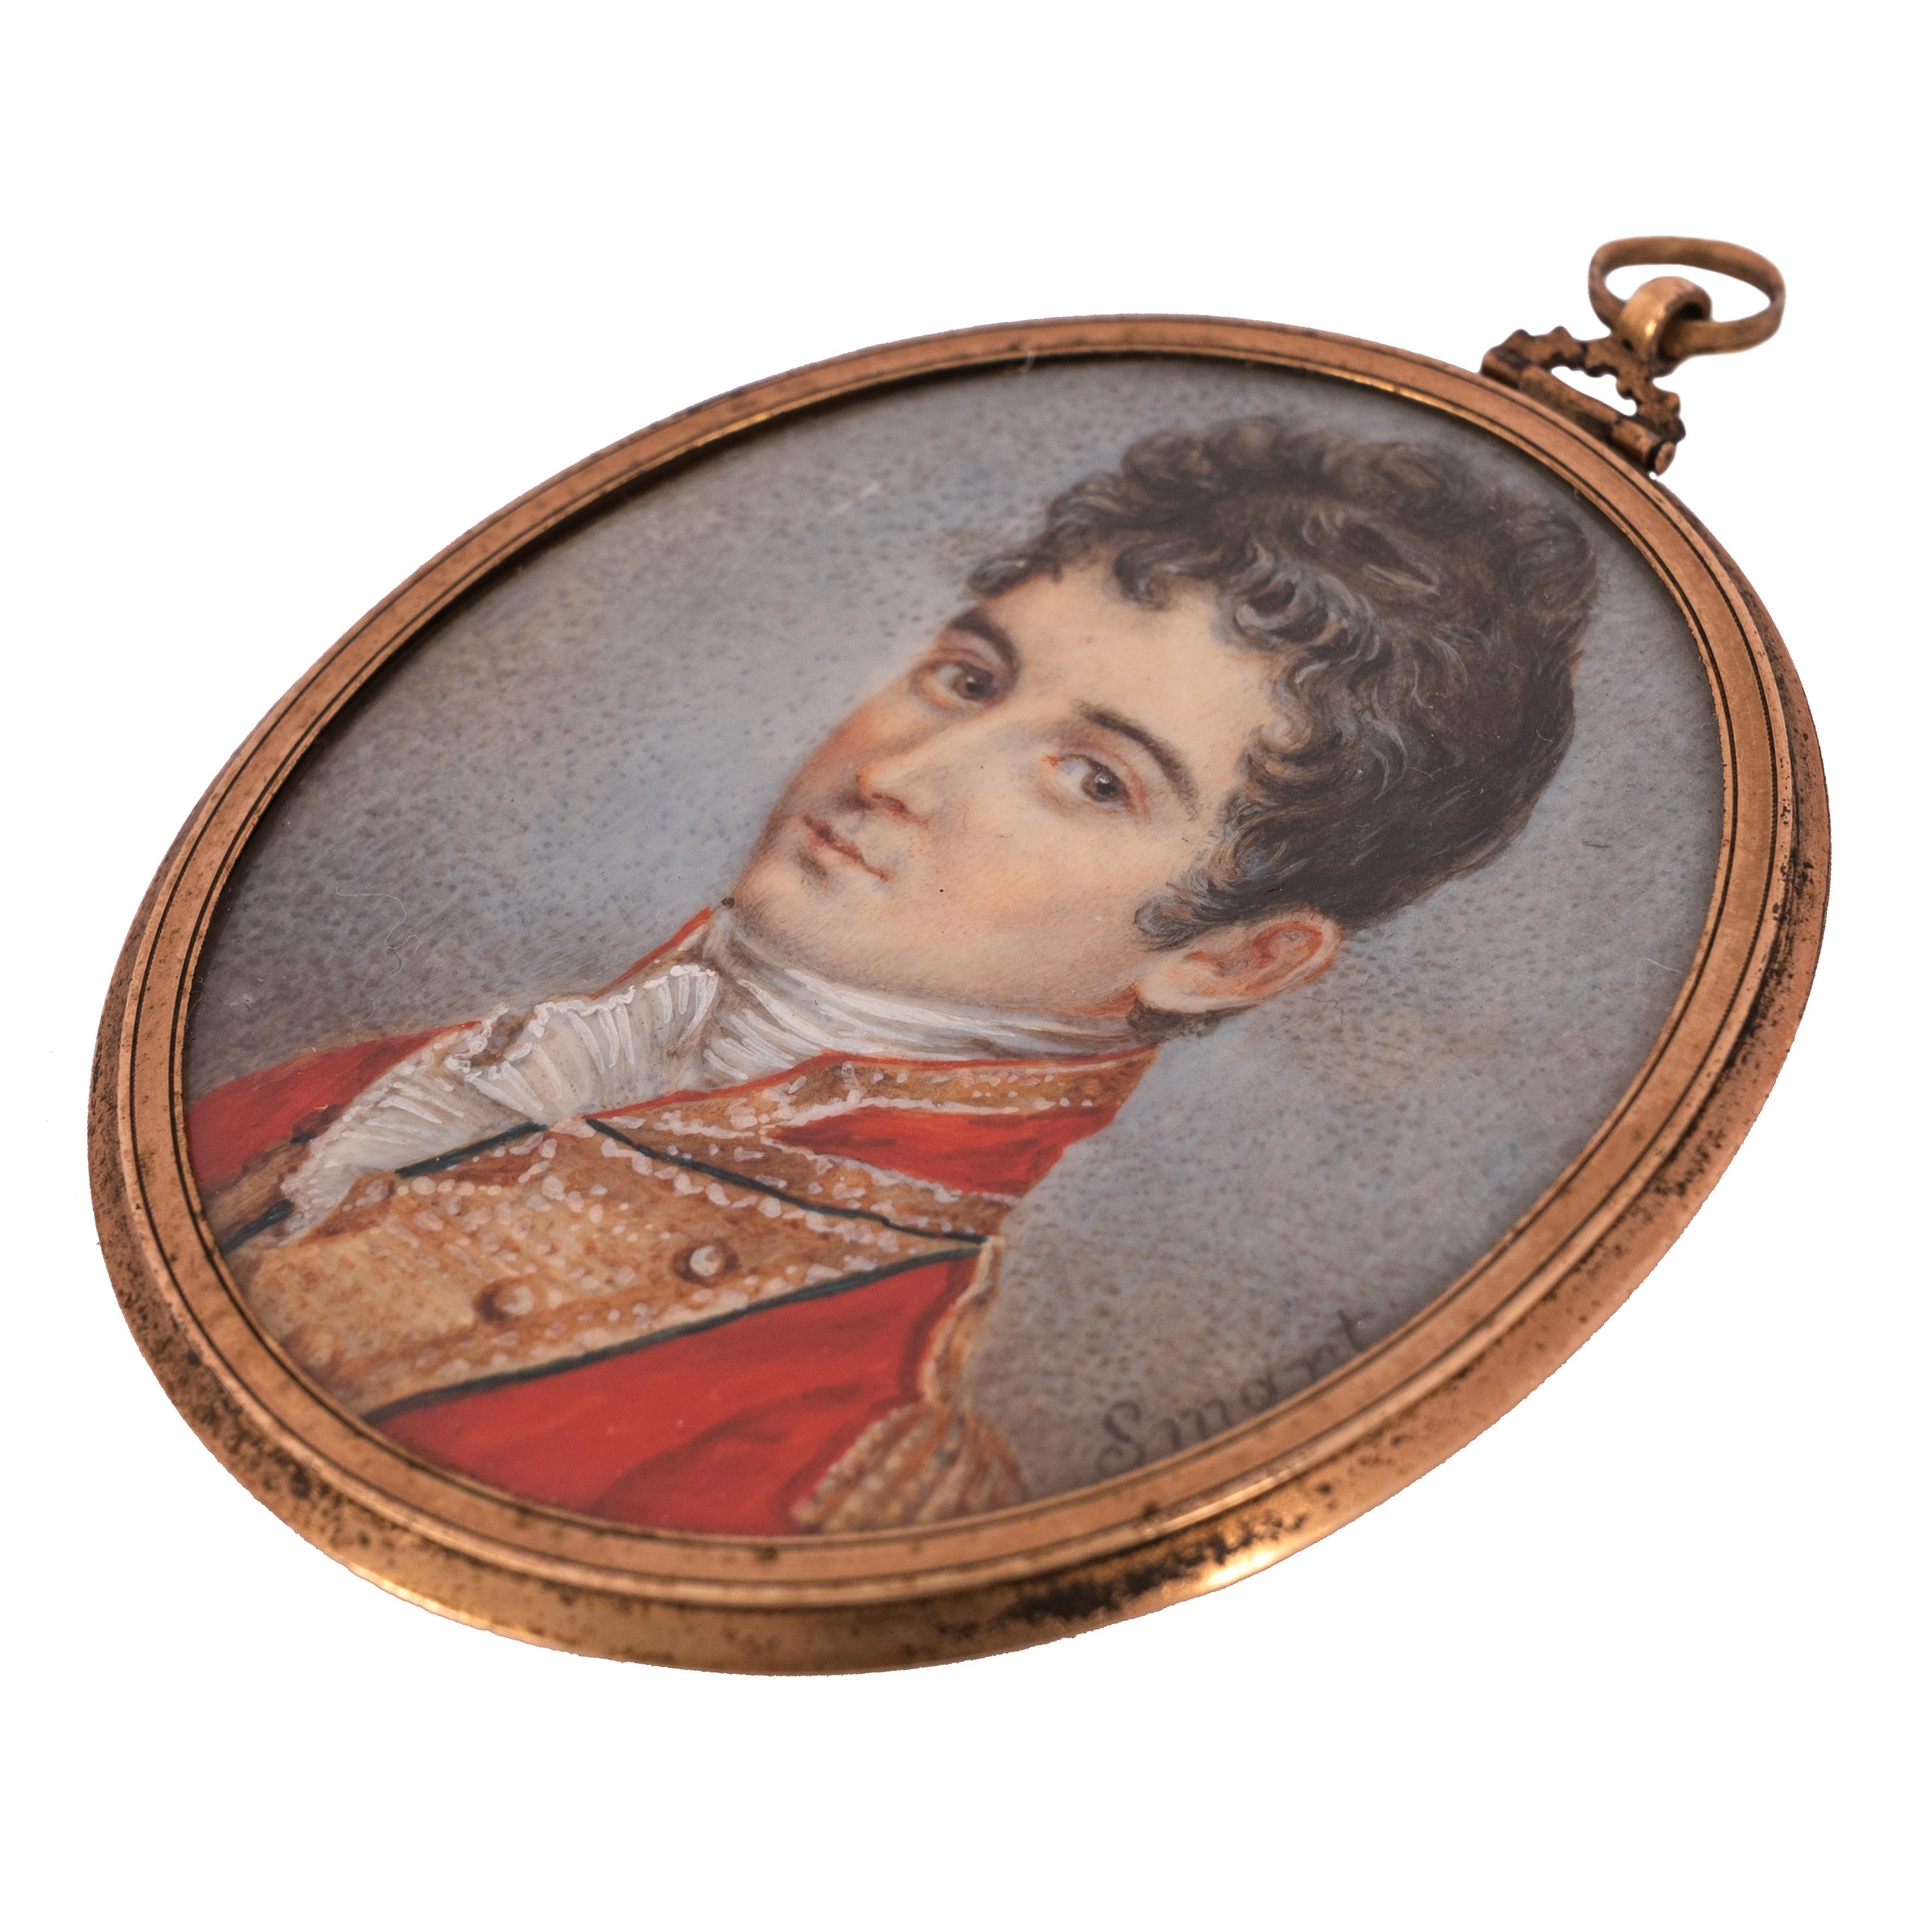 Painted Antique Miniature Young Man Military Officer Portrait Painting John Smart, 1780 For Sale